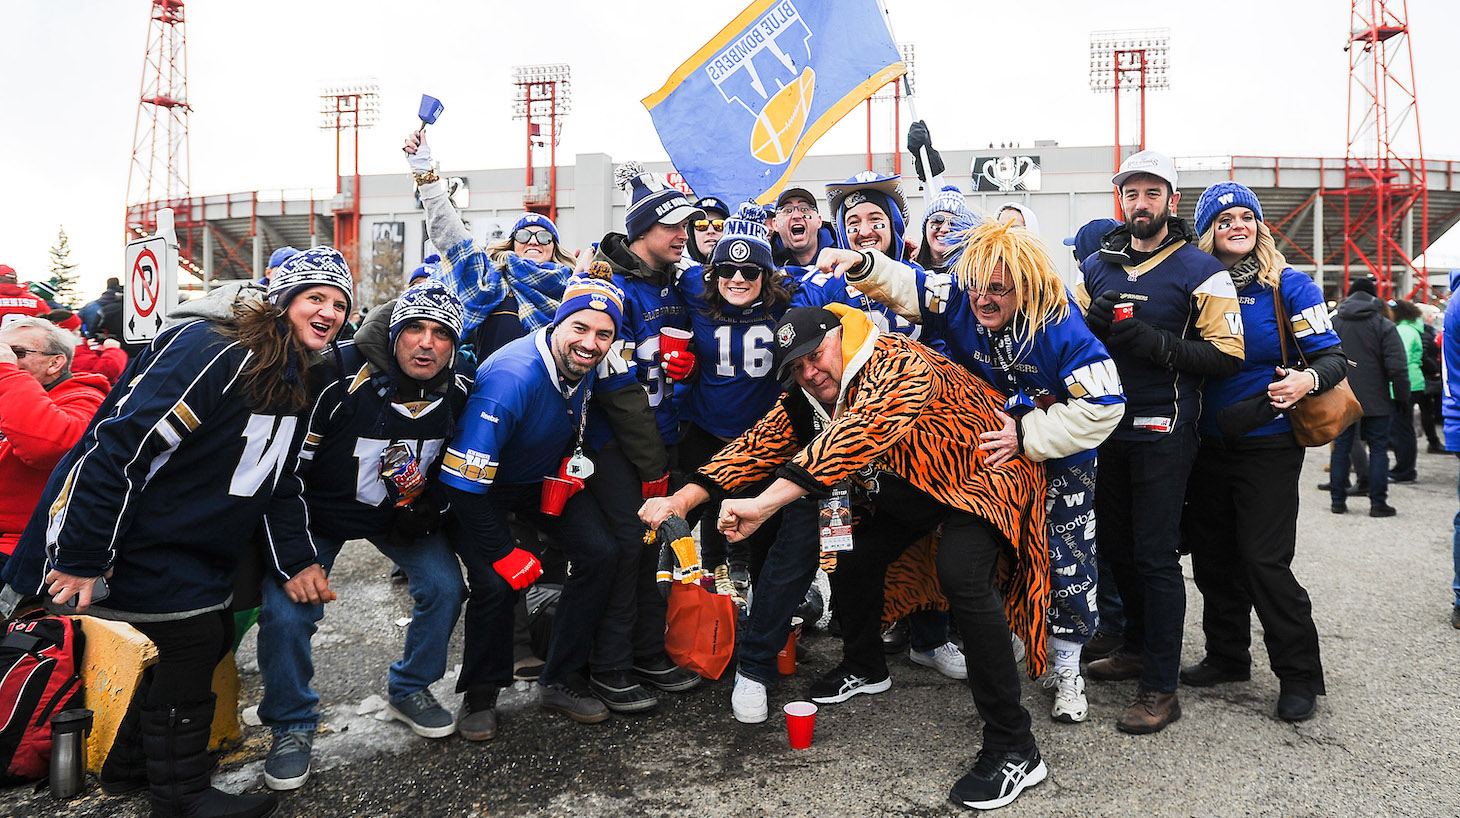 CALGARY, AB - NOVEMBER 24: Winnipeg Blue Bombers fans and a single Hamilton Tiger-Cats fan rally their team prior to the 107th Grey Cup Championship Game against the Hamilton Tiger-Cats during at McMahon Stadium on November 24, 2019 in Calgary, Alberta, Canada. (Photo by Derek Leung/Getty Images)